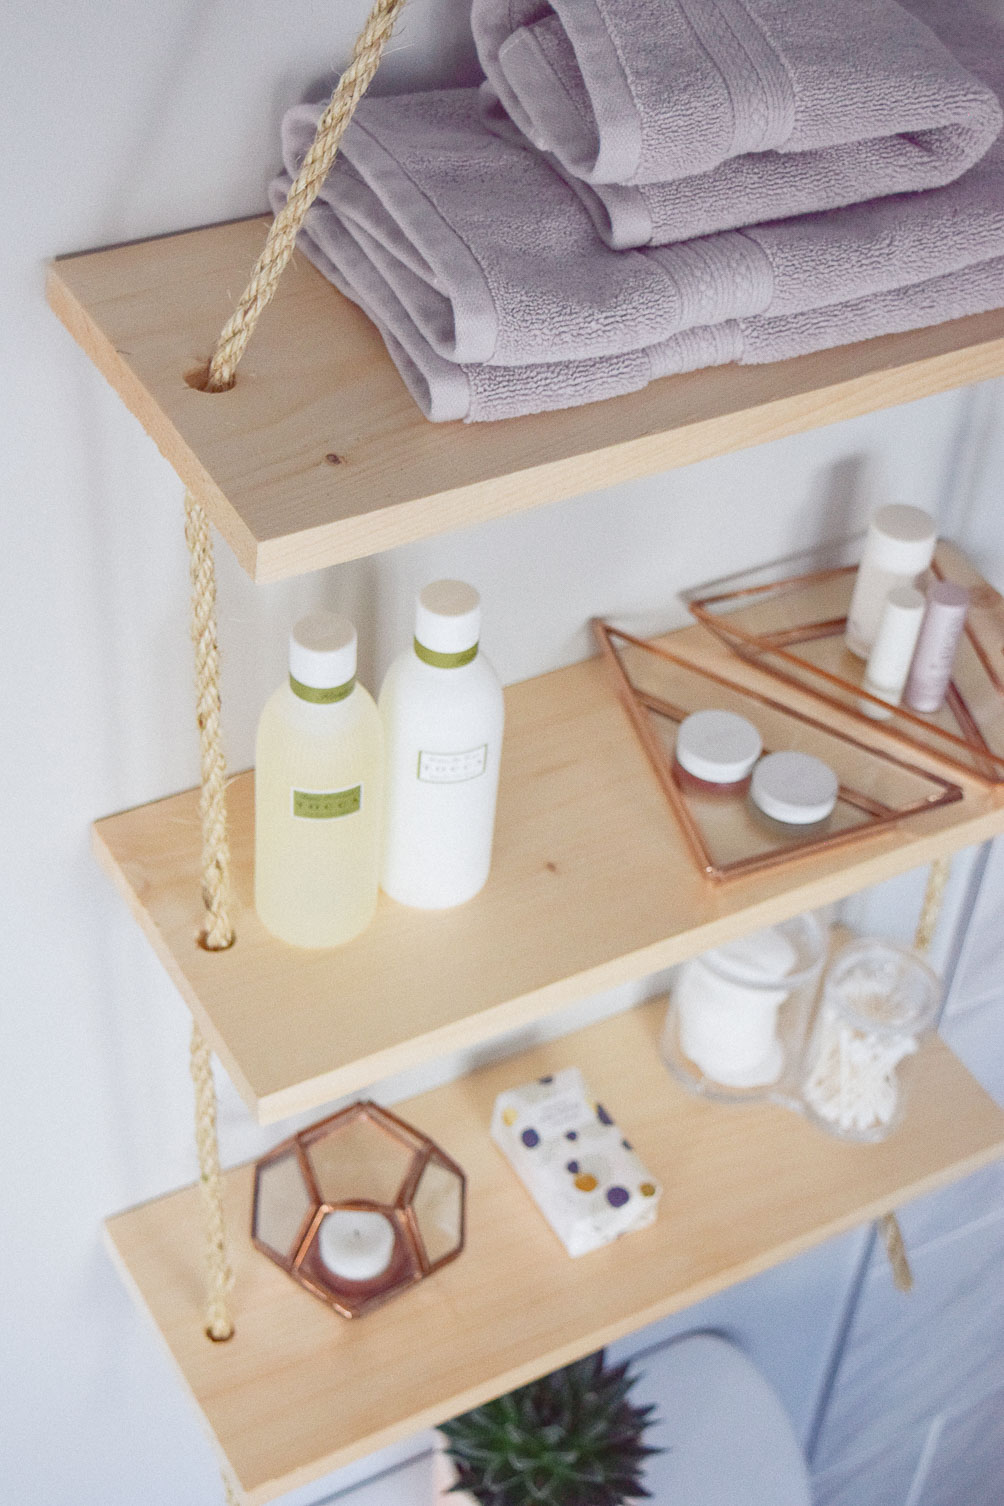 sharing an idea to update home decor with diy hanging shelves for bathroom storage